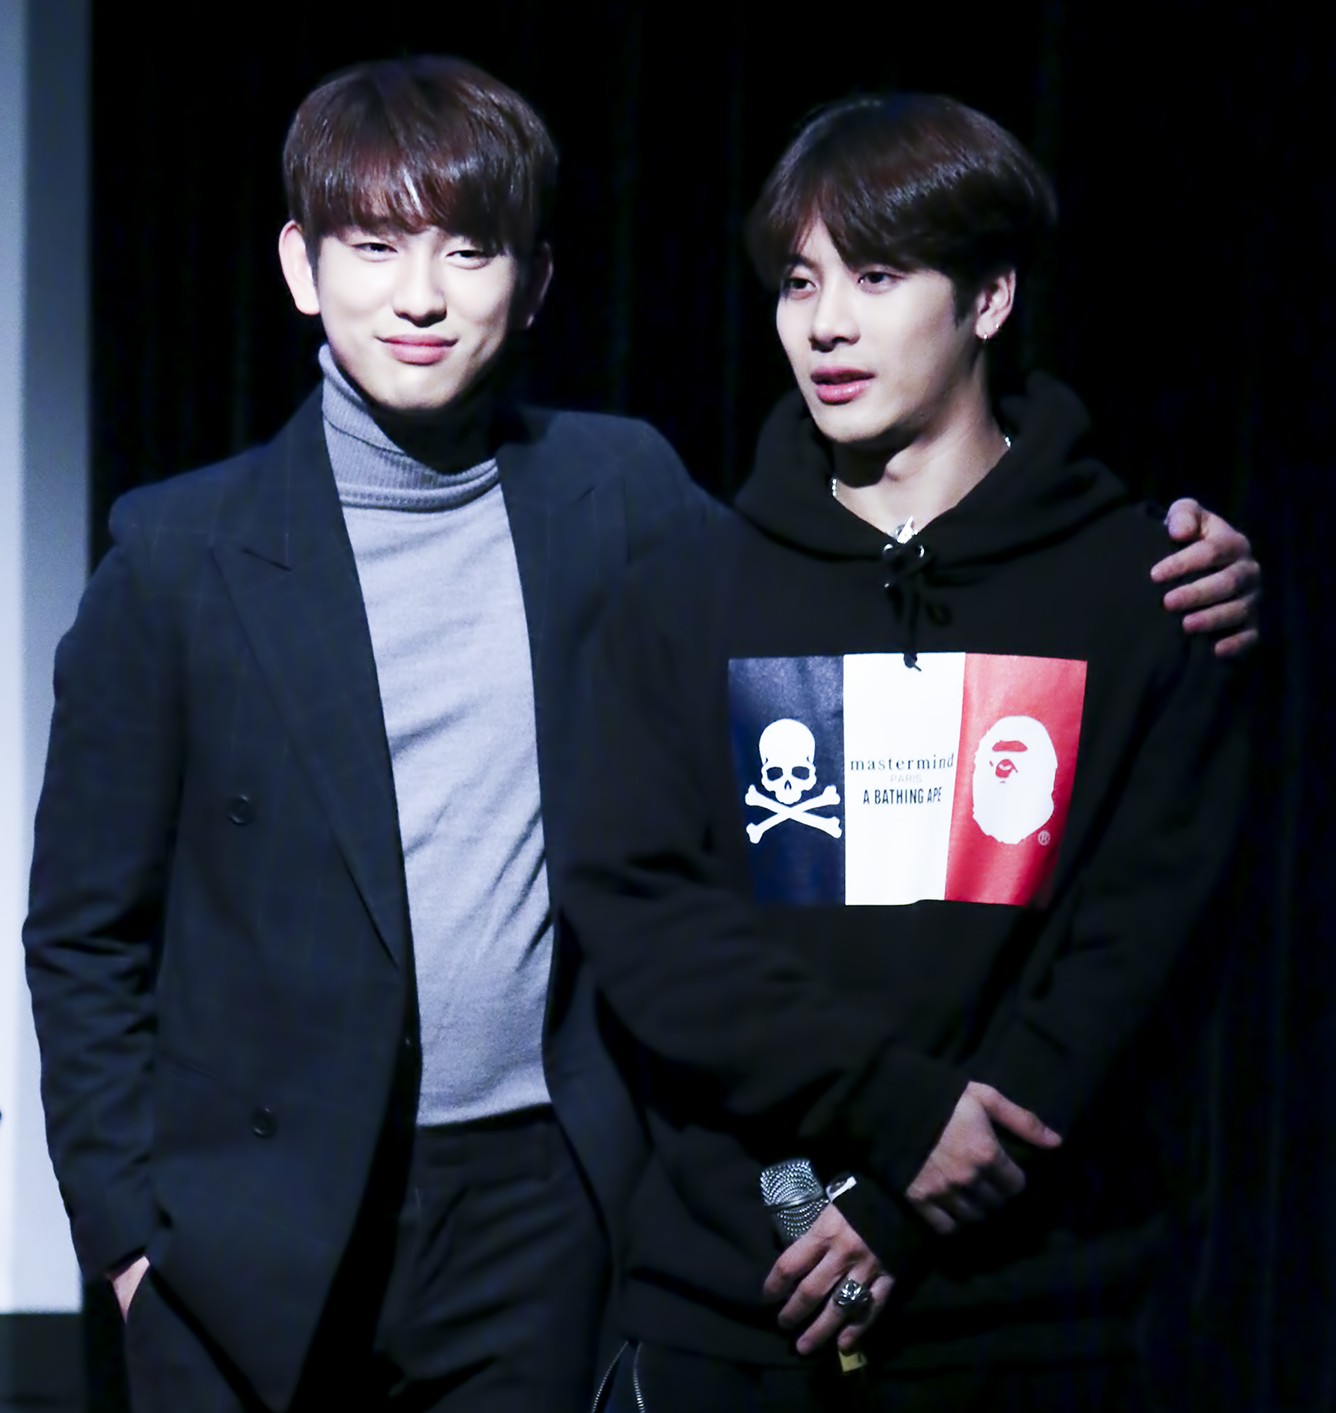 File:Park Jin-young and Jackson Wang at a fansigning event in